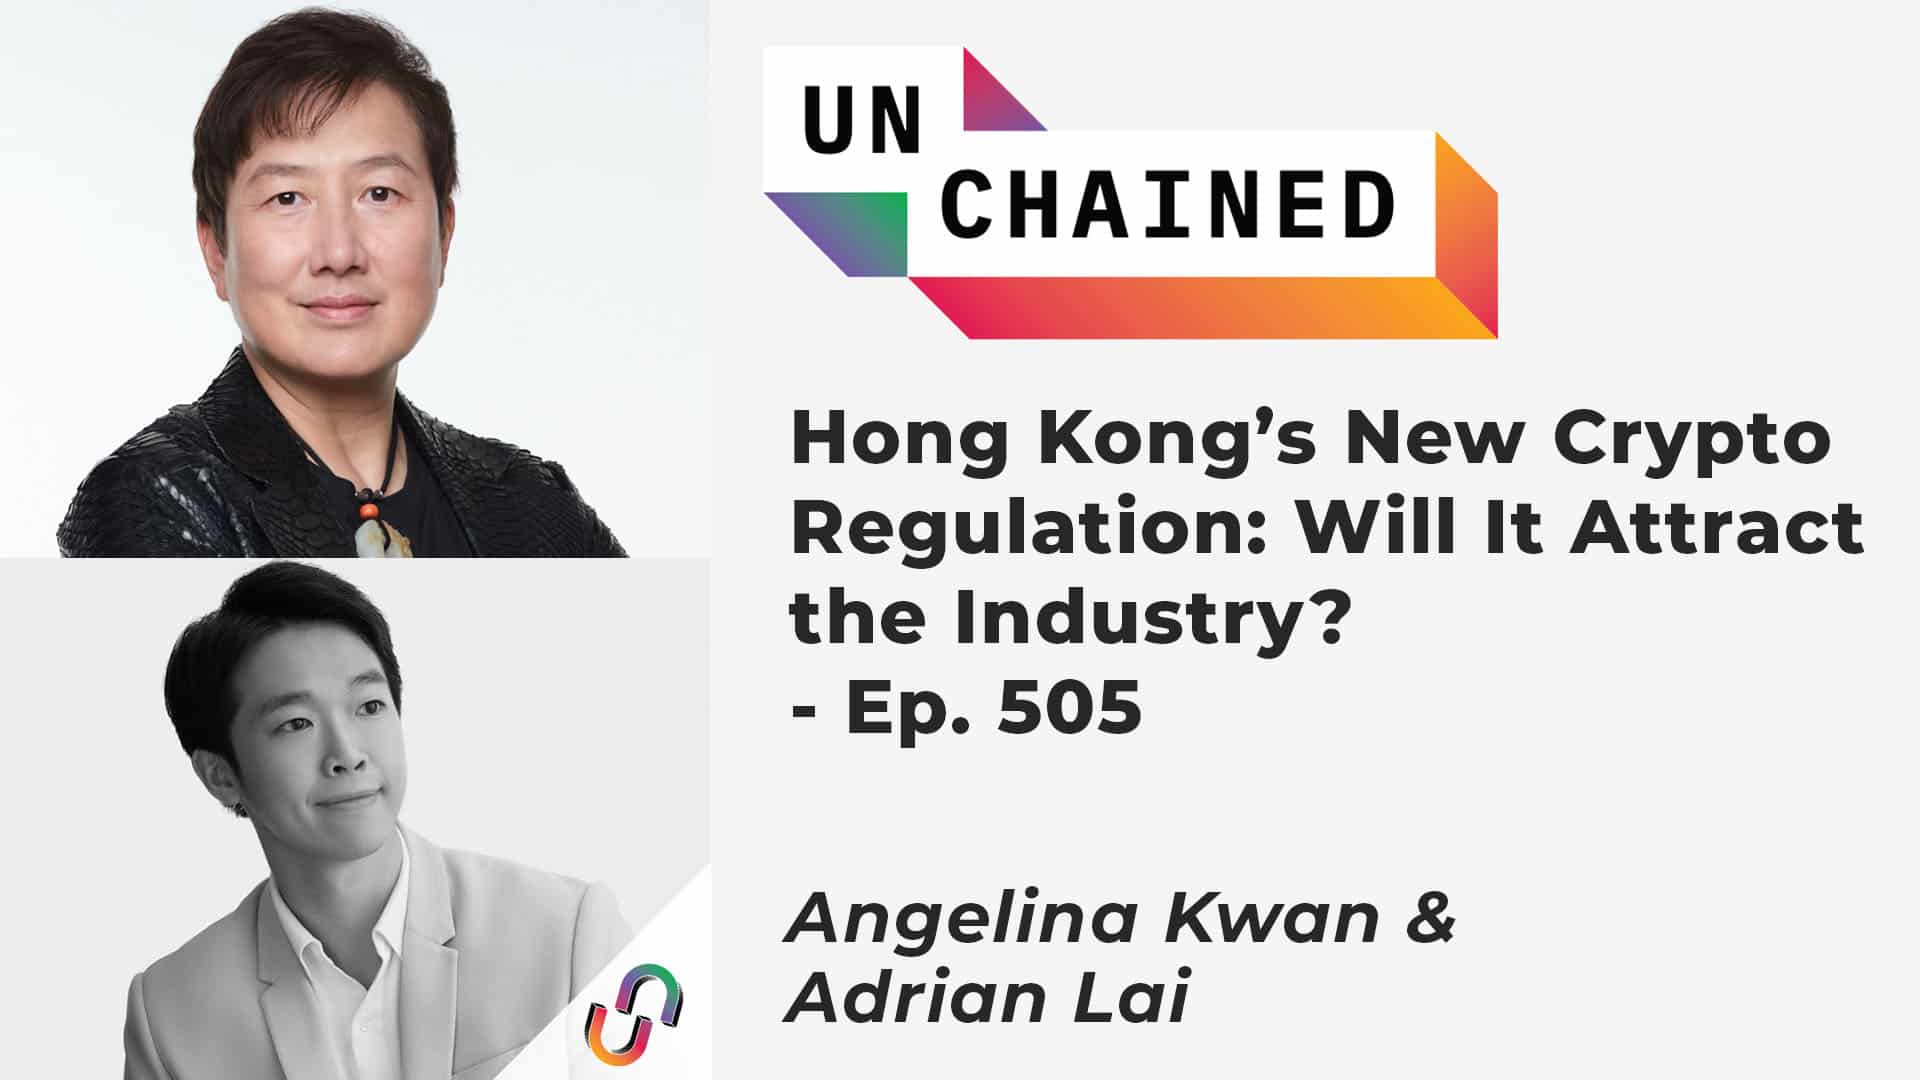 Hong Kong's New Crypto Regulation: Will It Attract the Industry? - Ep. 505